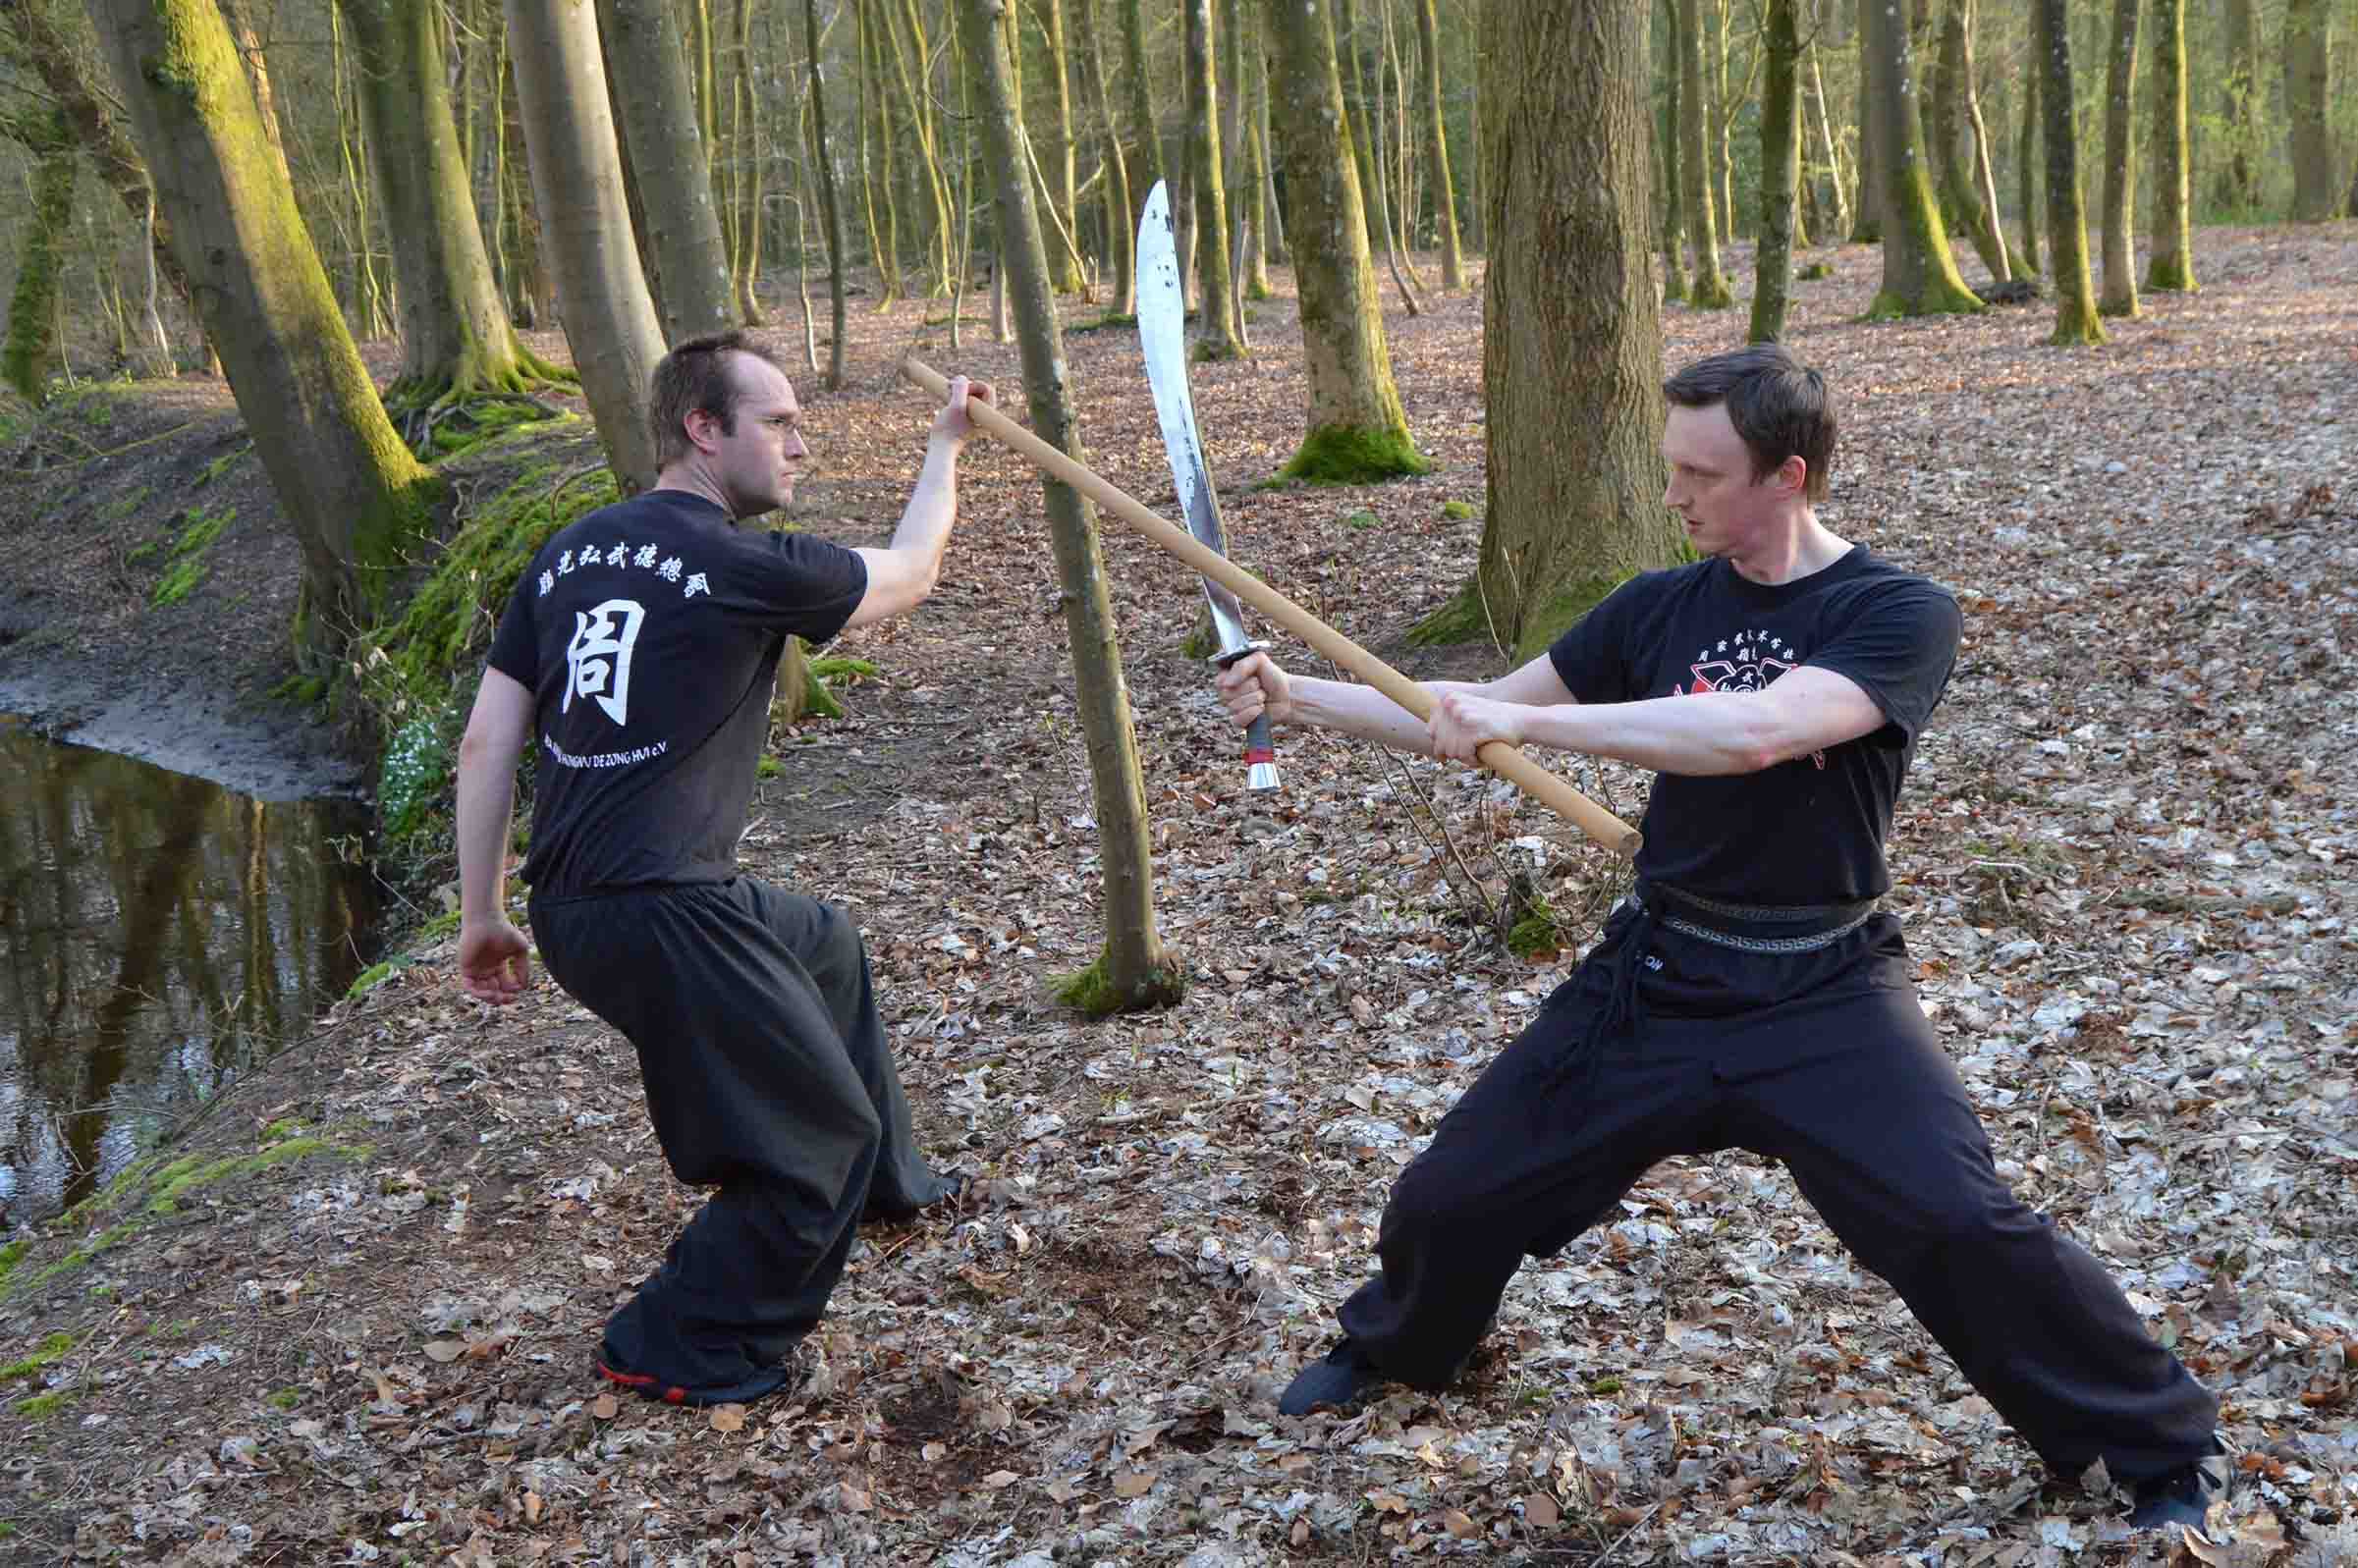 Read more about the article “Zhou Jia Quan” Kung Fu beim TSV Hesel – jetzt auch für Kinder